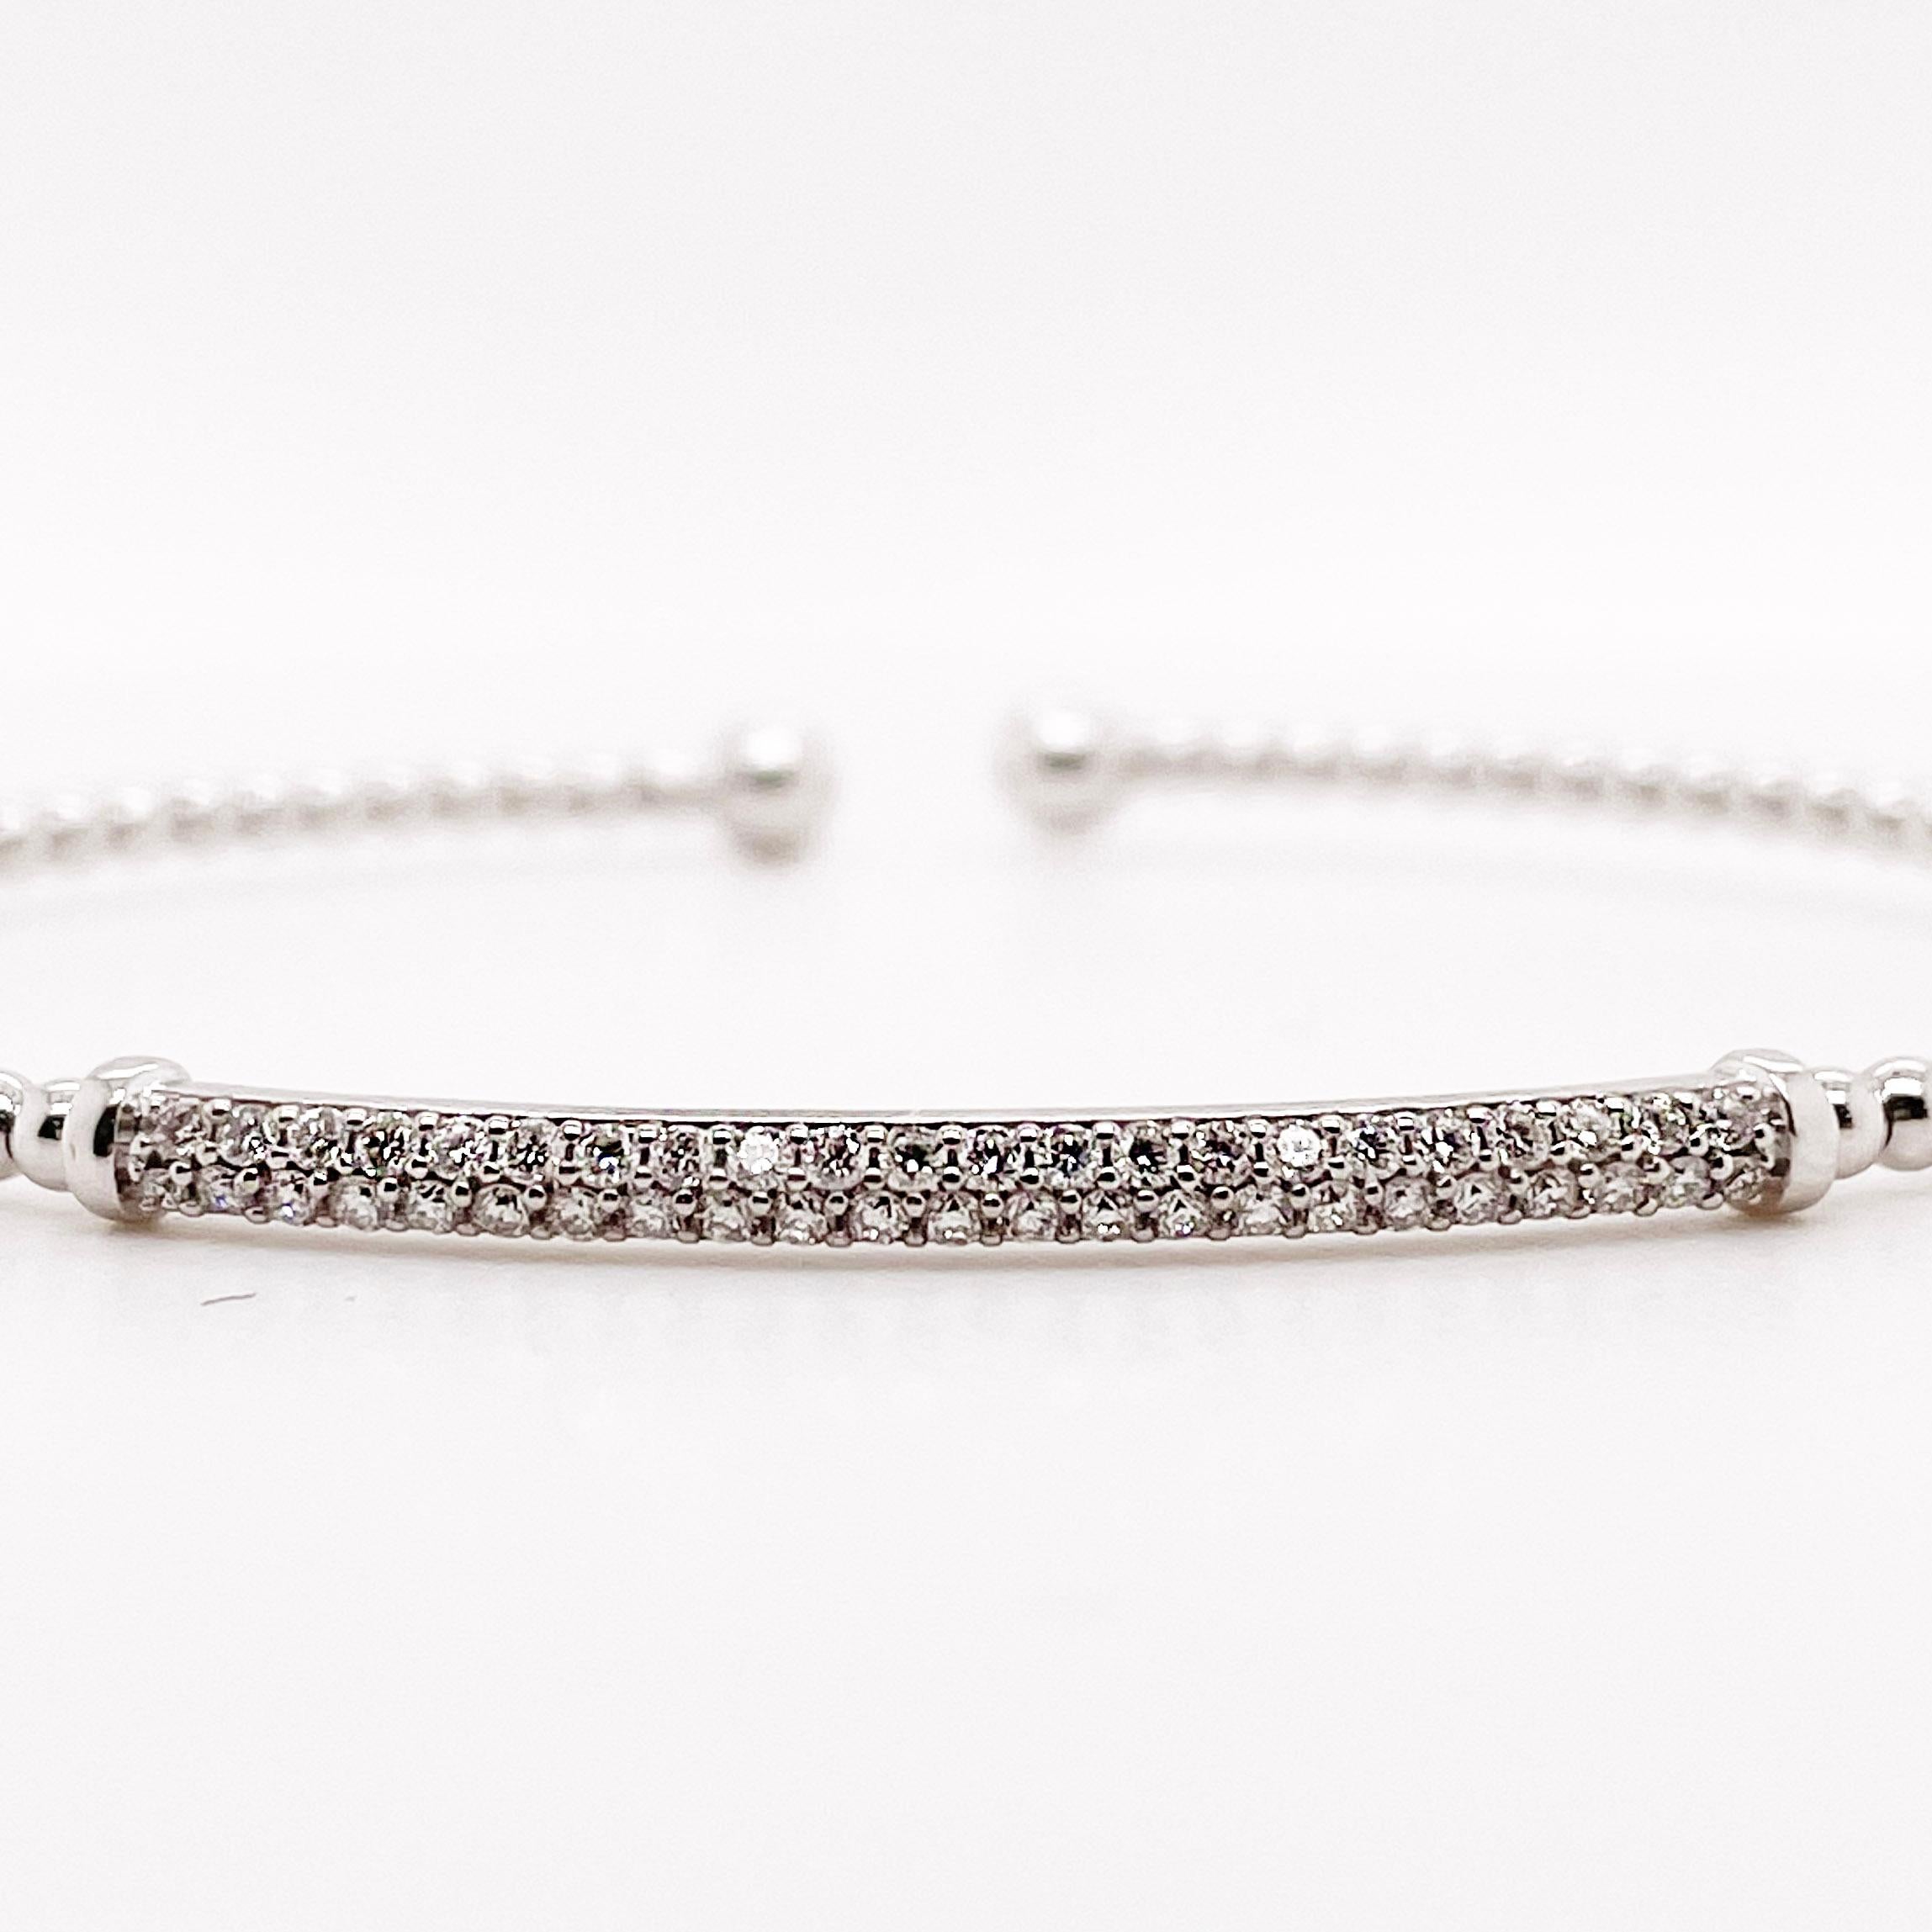 Do you want a bracelet that is easy to put on but will stay on your wrist? Stack several together to give a very stylish look! The details for this gorgeous bracelet are listed below:
Bracelet Type: Cuff, Bangle
Metal Quality: 14K White Gold
Length: